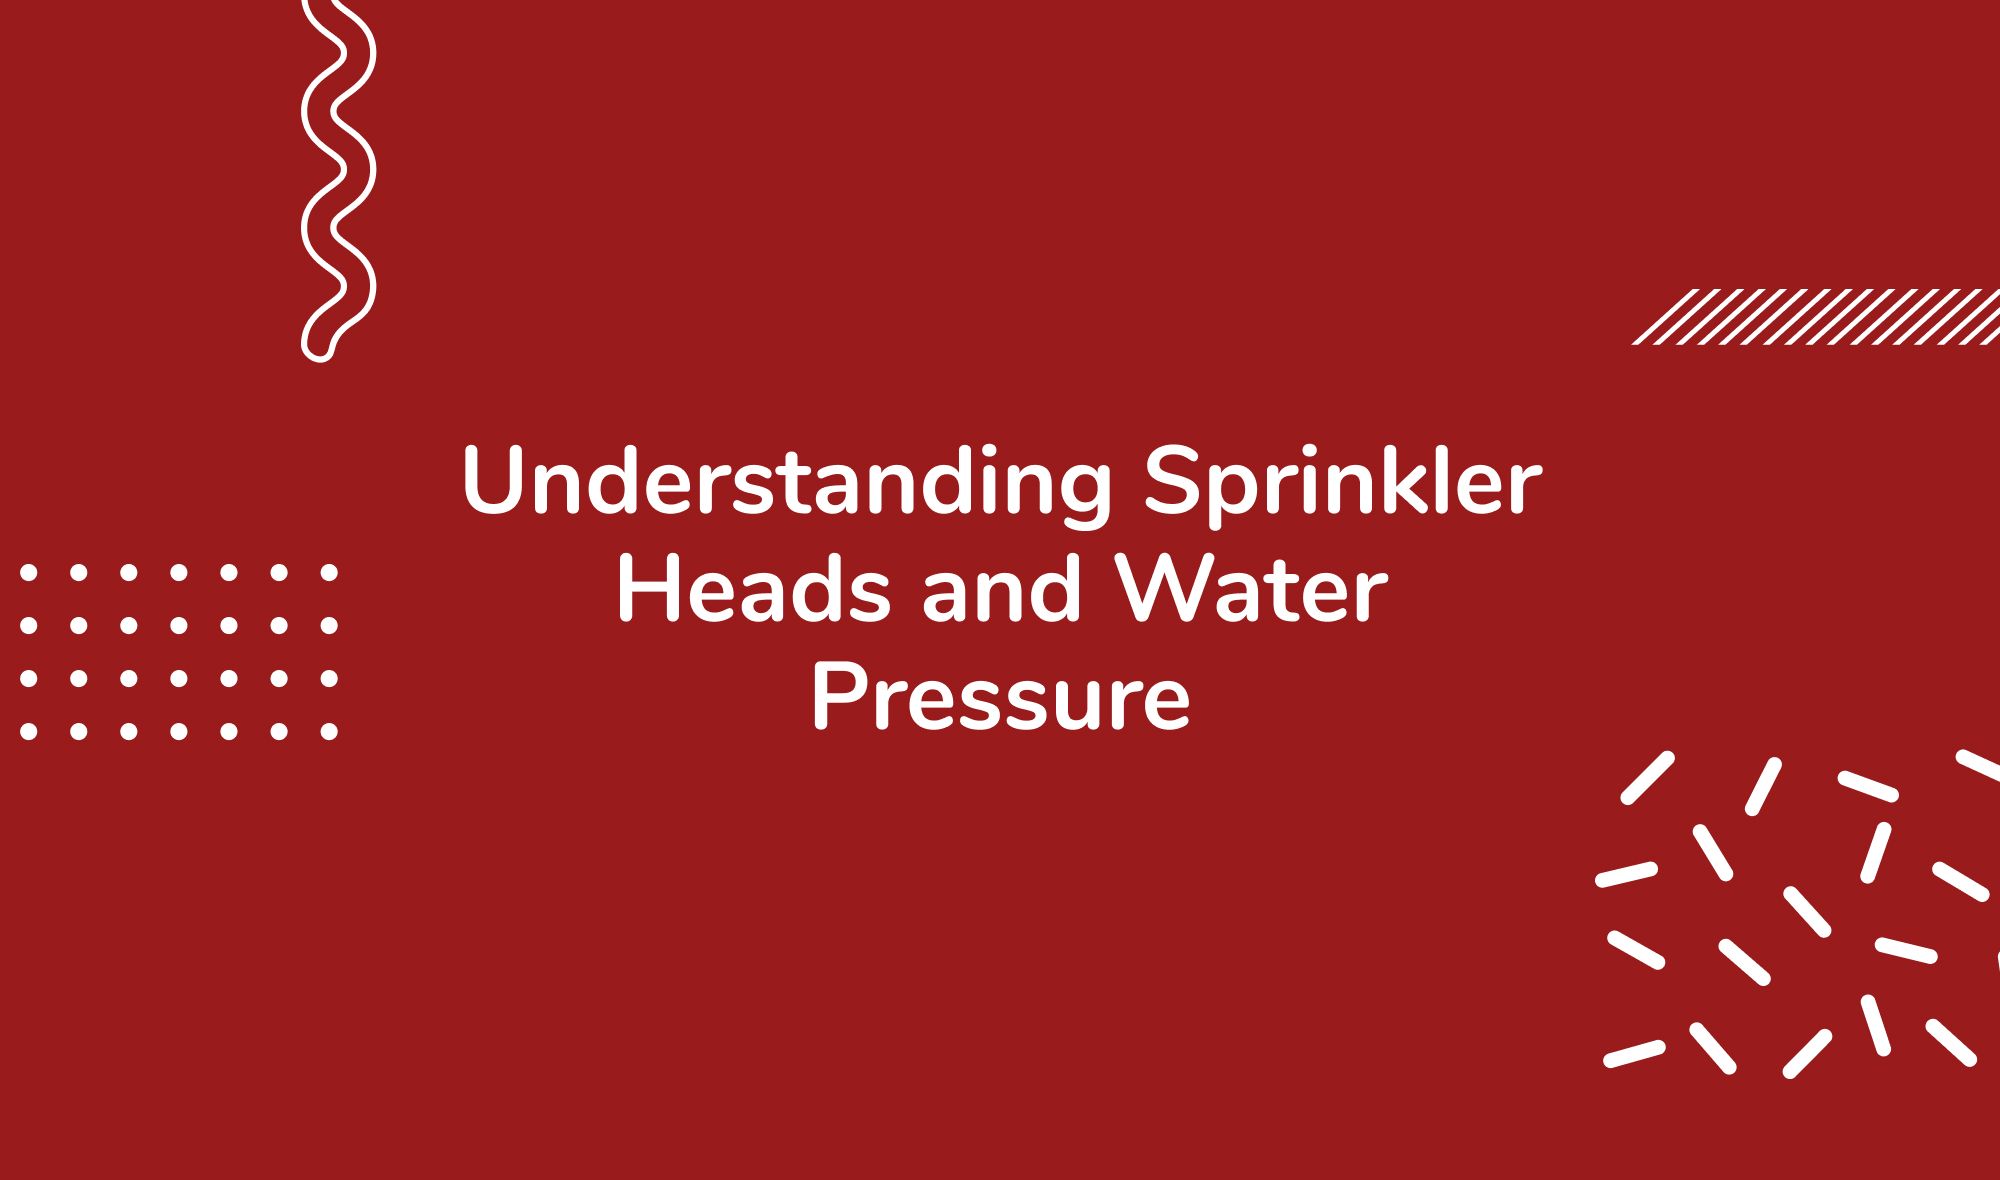 The Nuts and Bolts: Understanding Sprinkler Heads and Water Pressure